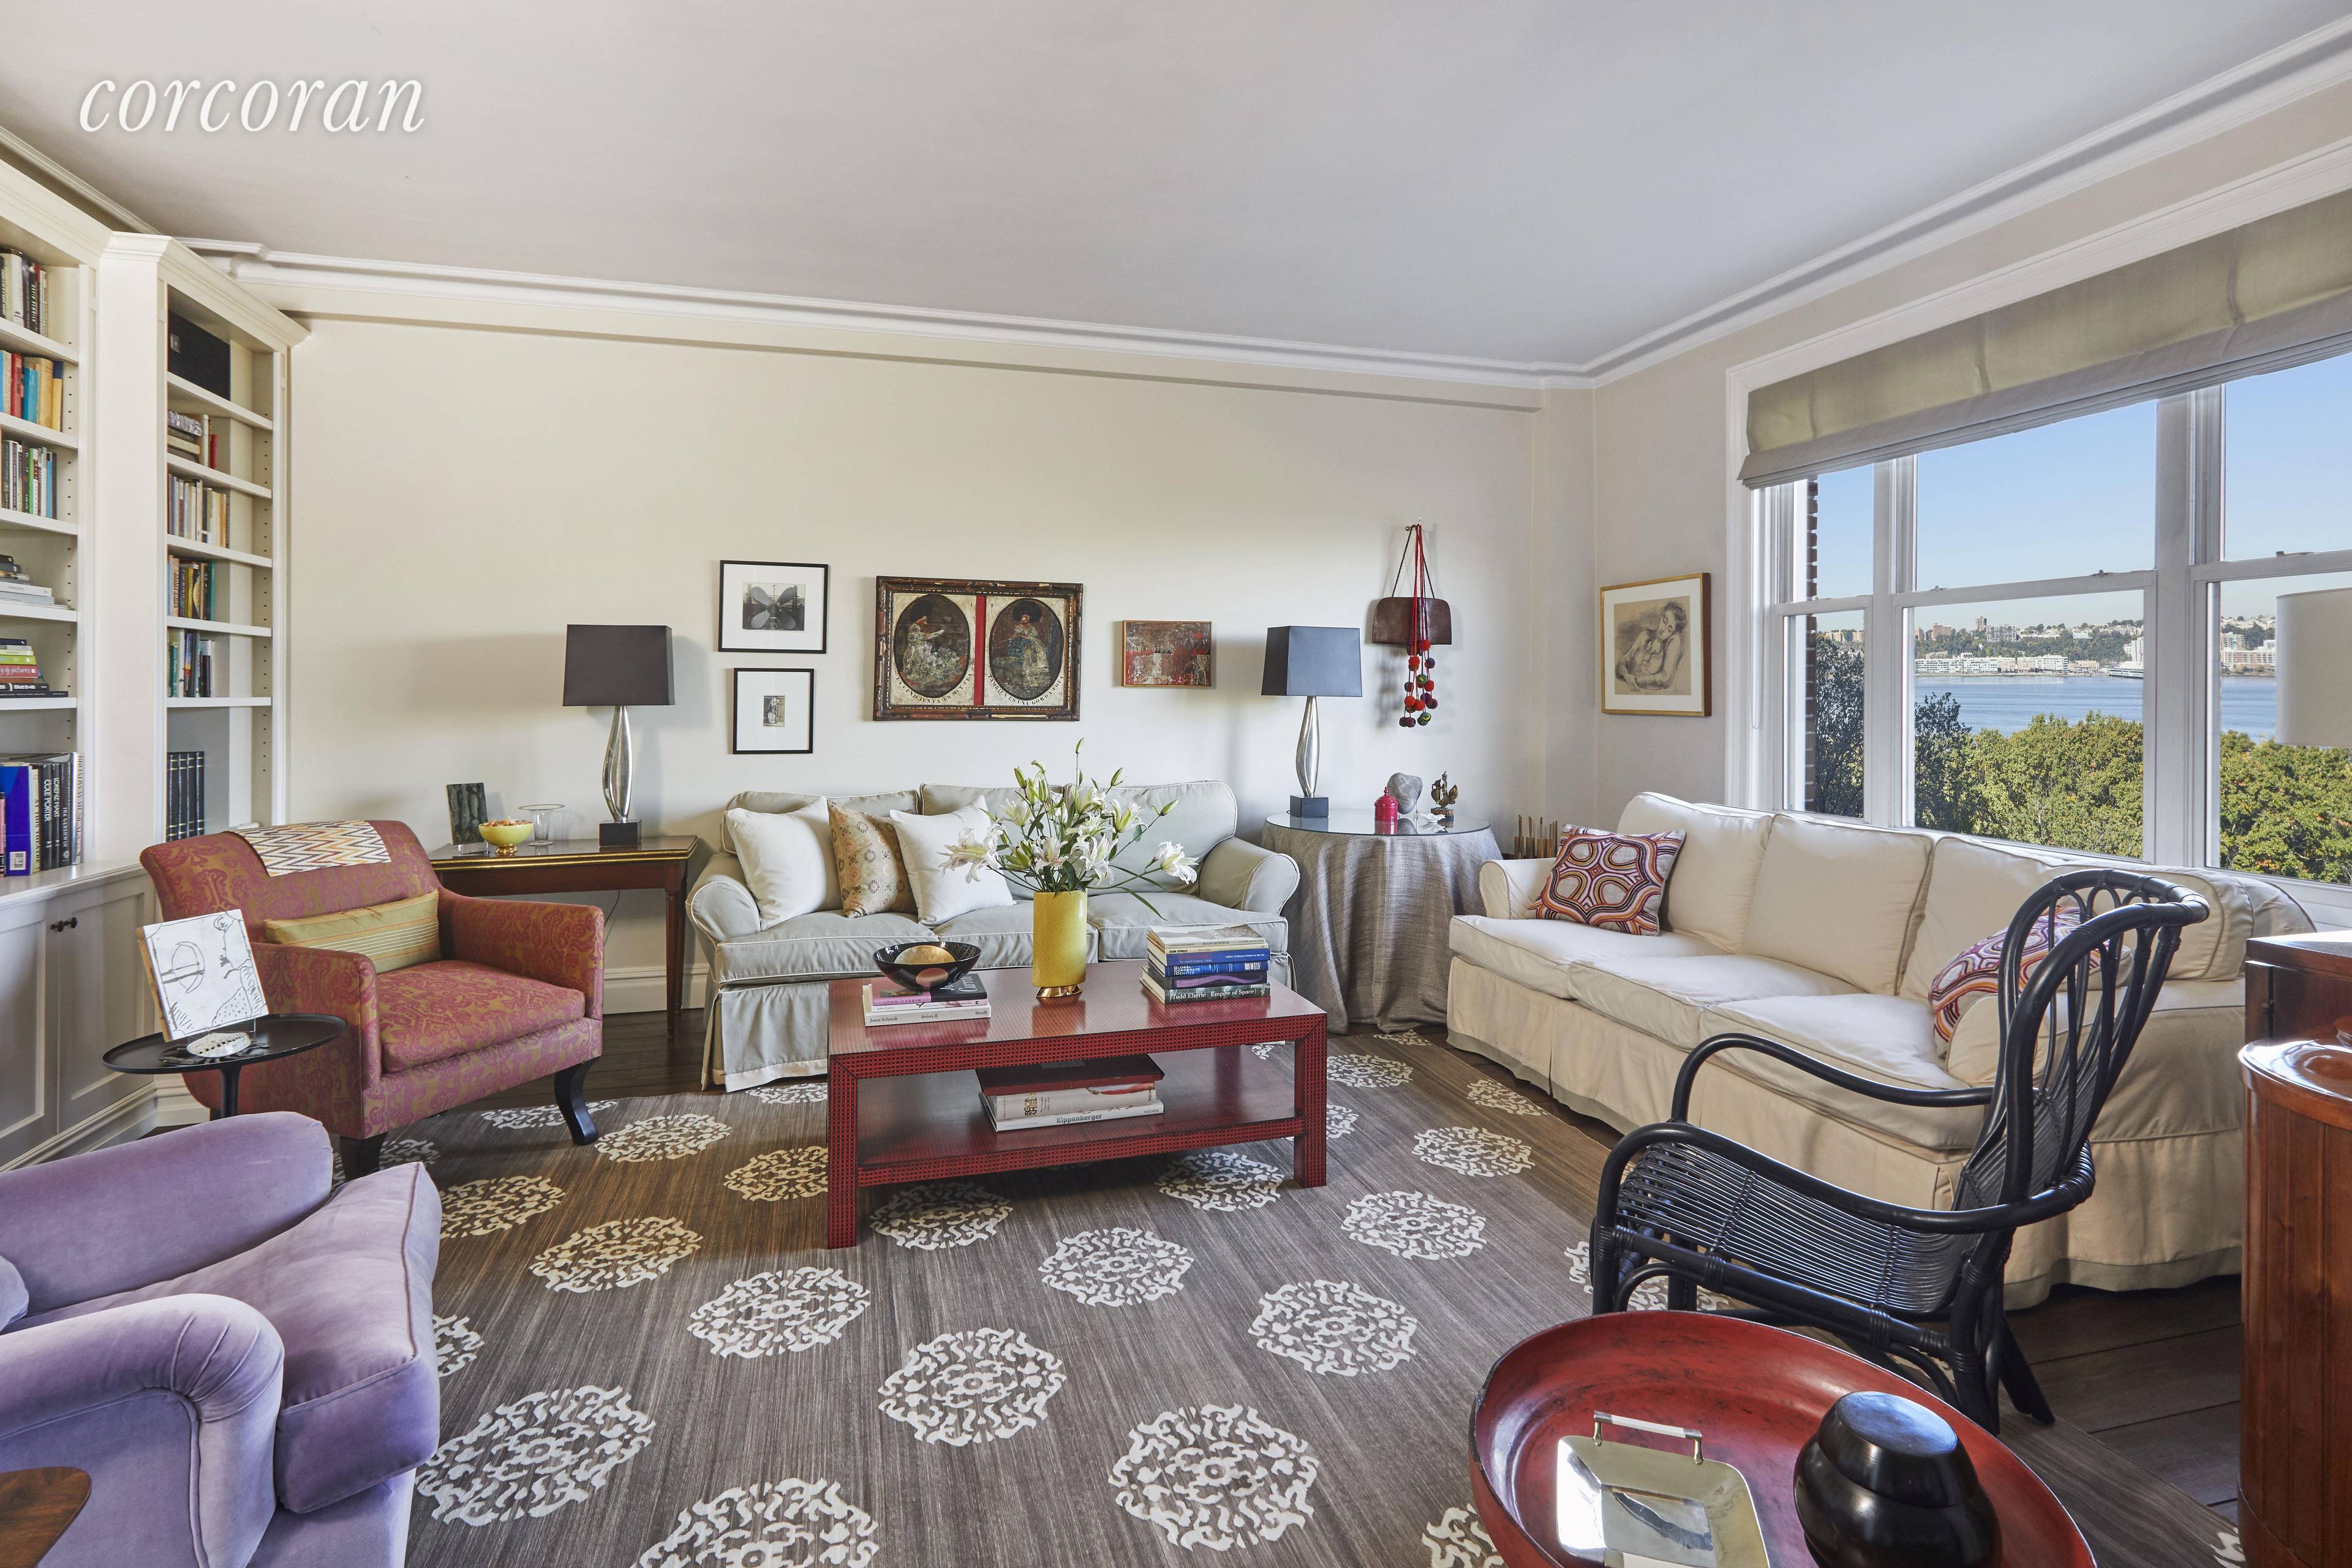 Panoramic hi floor River views from five major rooms and a gracious prewar layout make this 7 room, 4 bedroom home, a standout.